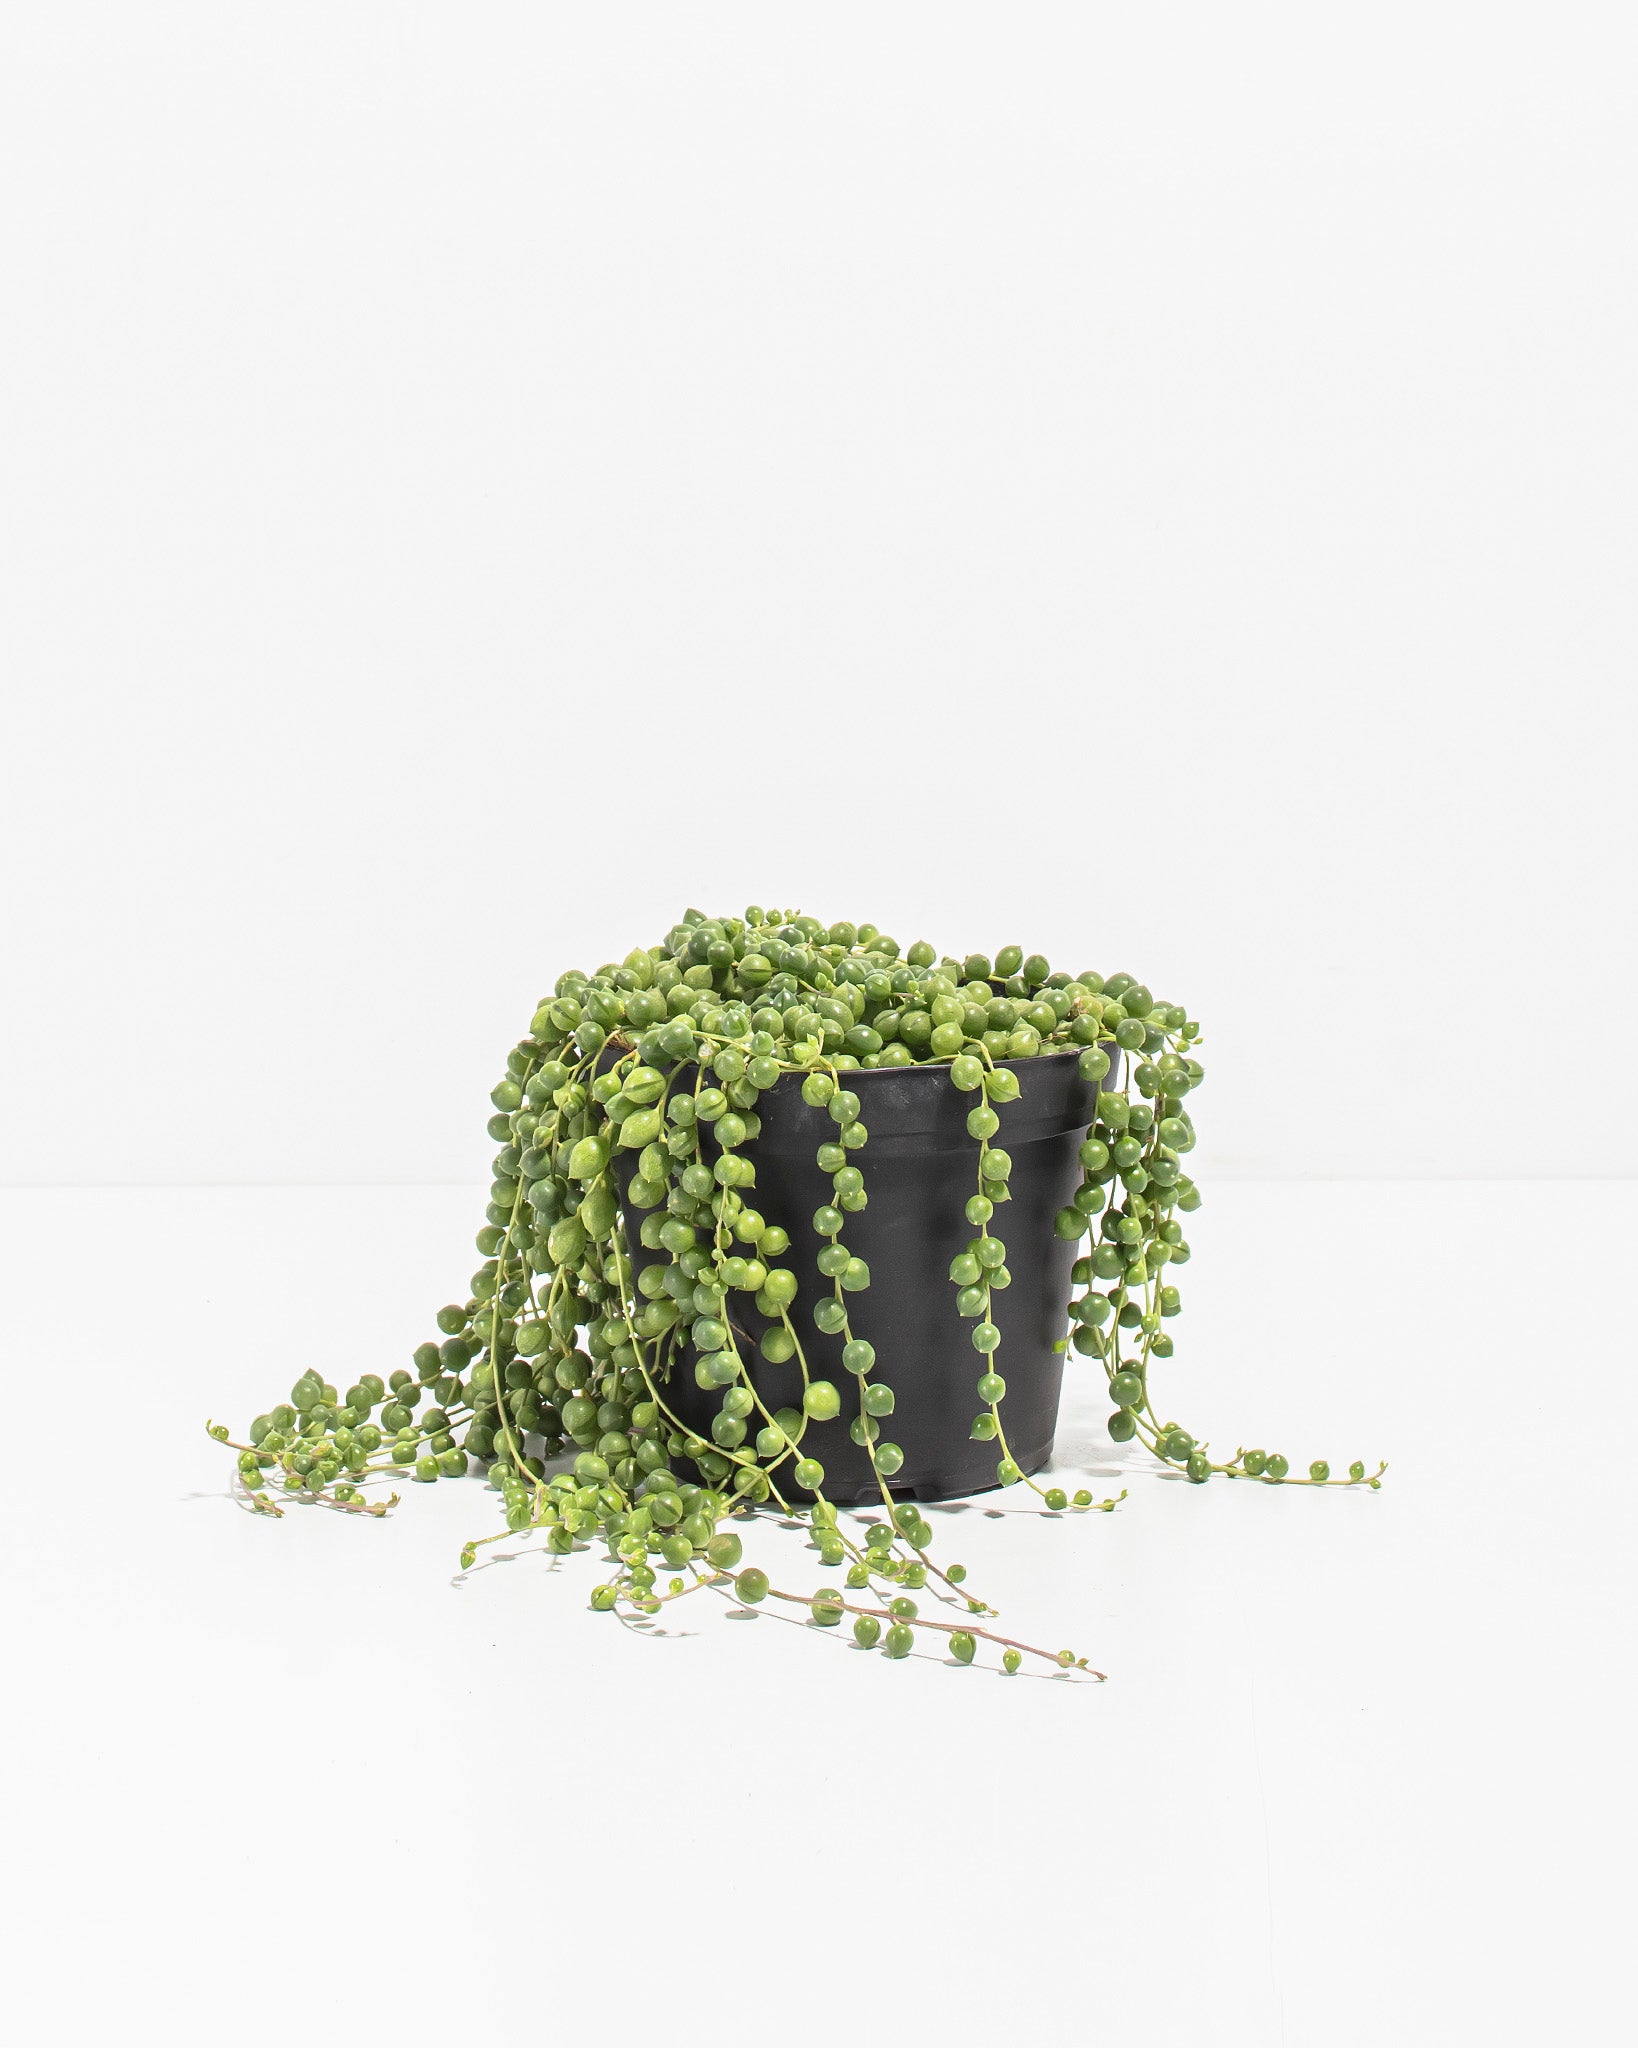 String Of Pearls Cuttings & How To Plant Them / Joy Us garden 